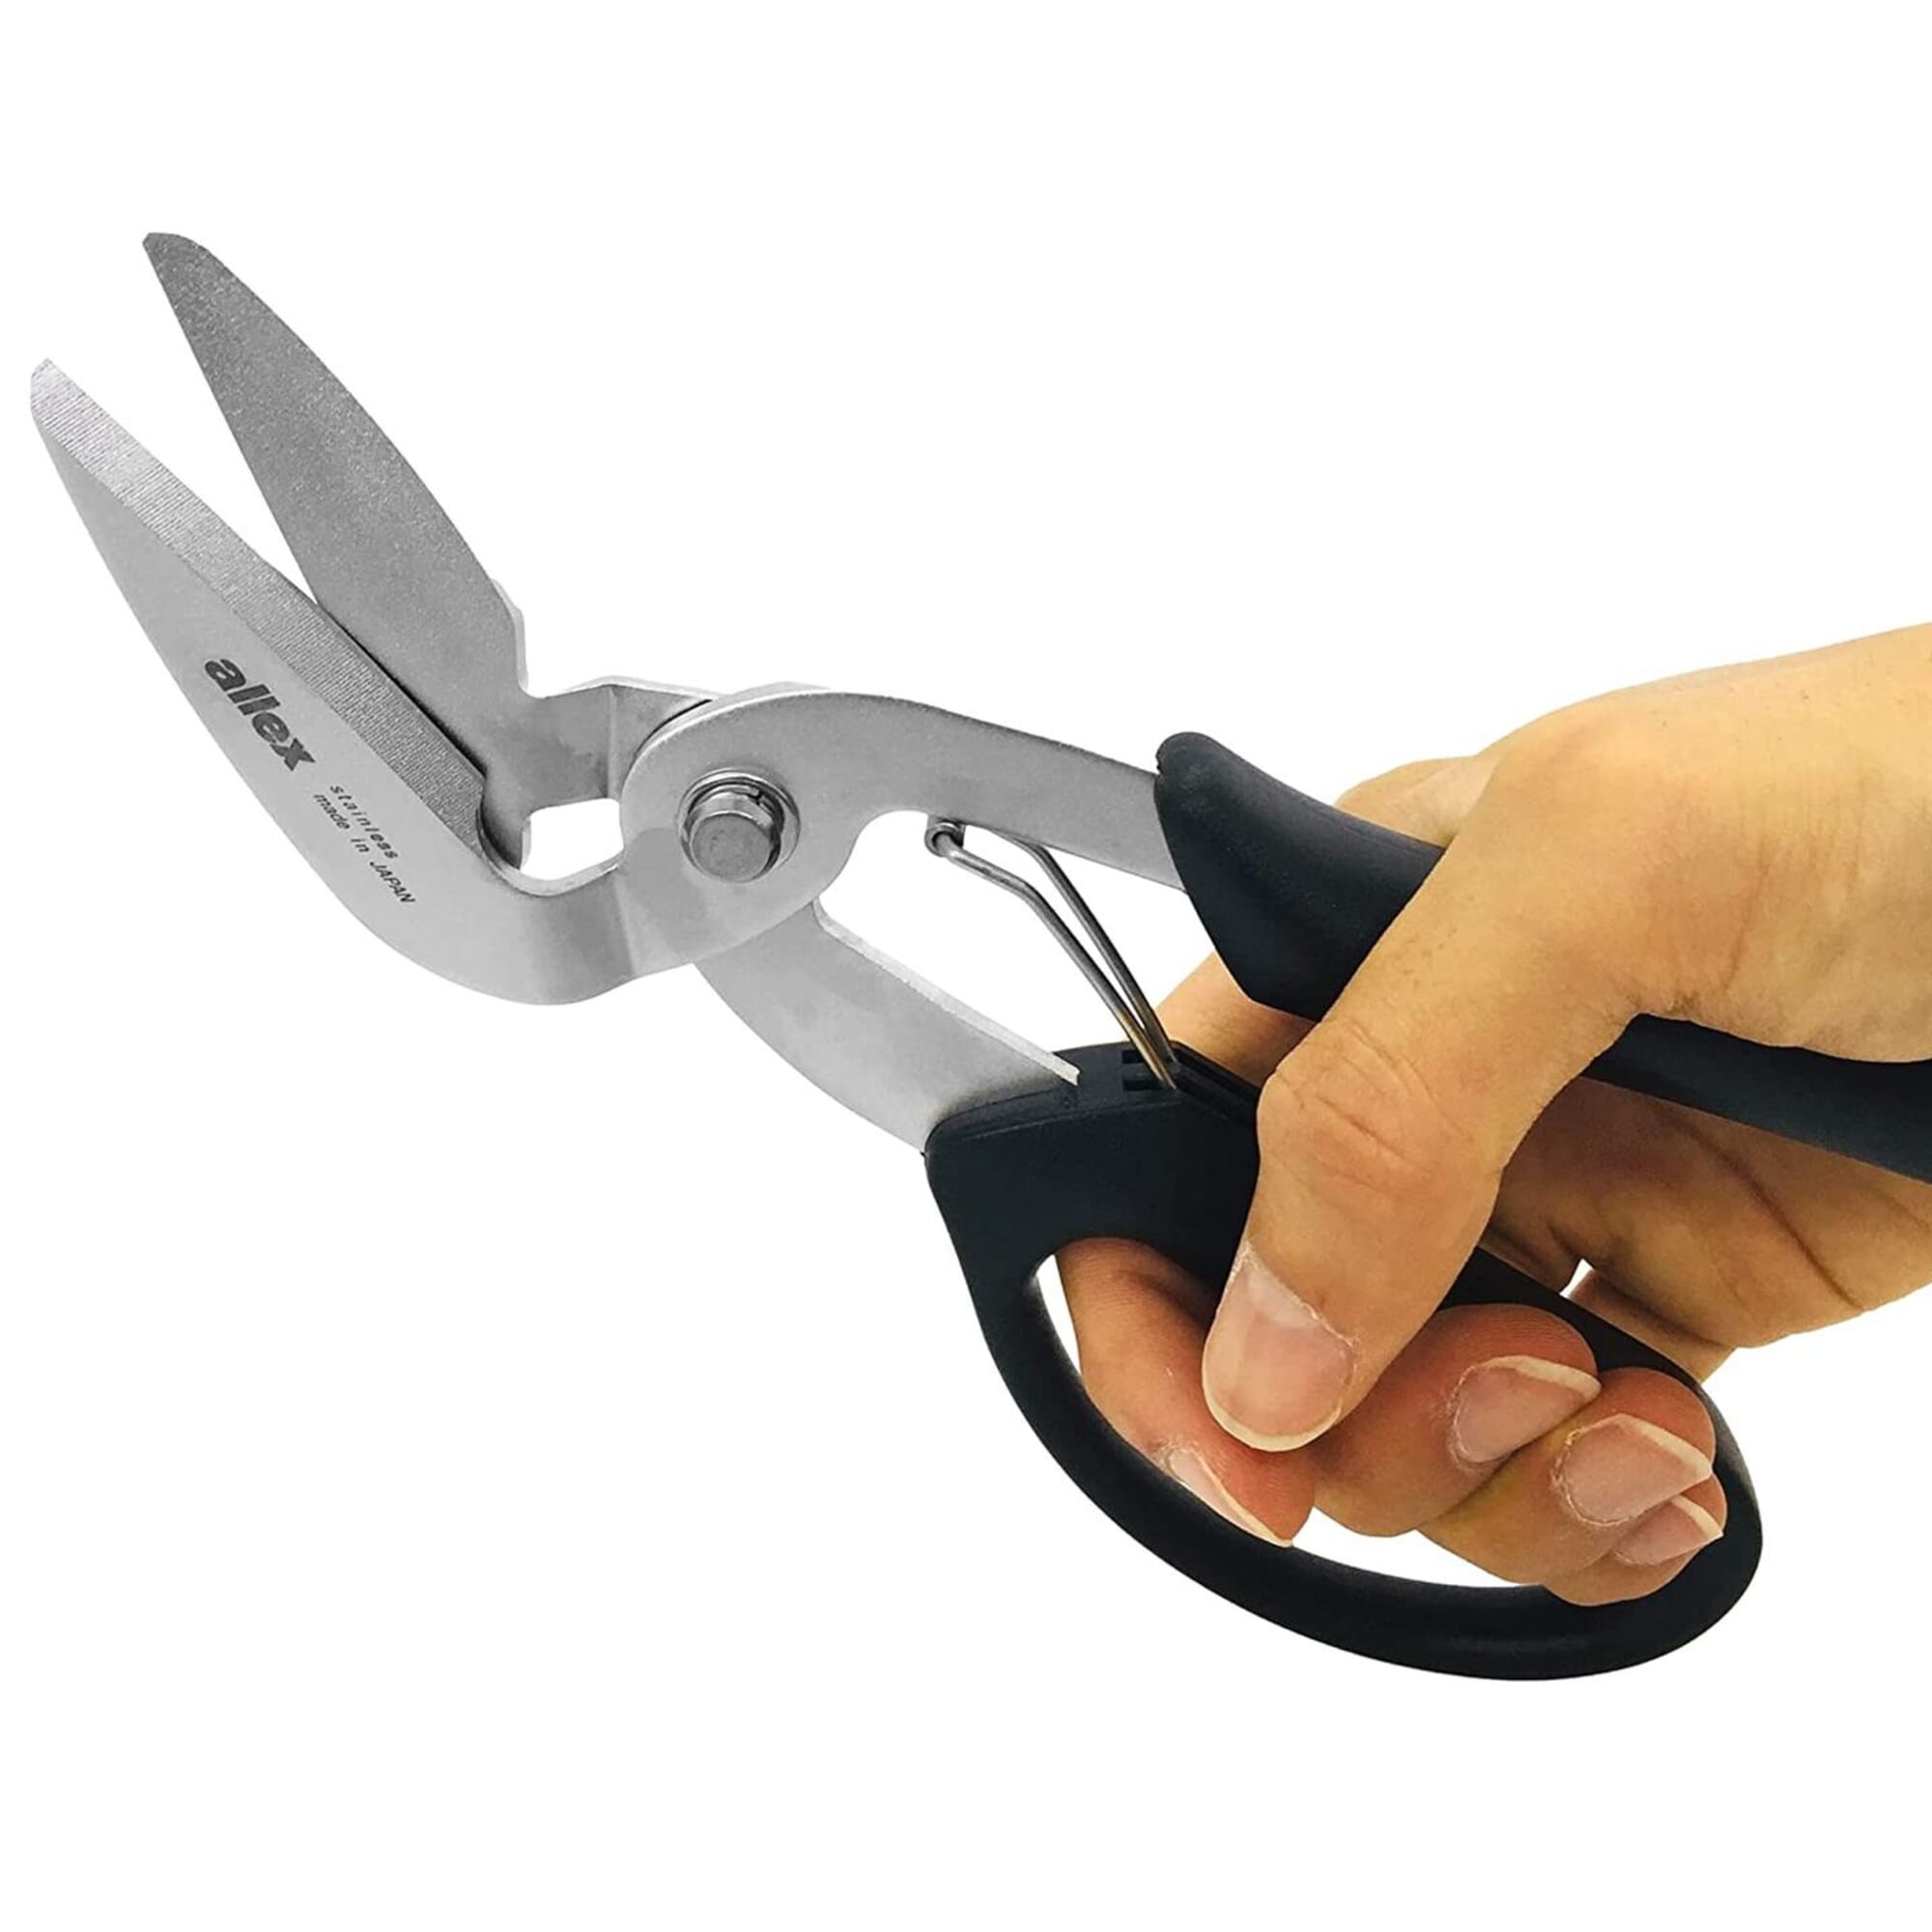 ALLEX Japanese Sheet Metal Cutter Shears 9.5 Straight Blade, Heavy Duty  Japanese Steel Blade with Spring Loaded Handle, Made in JAPAN, Black